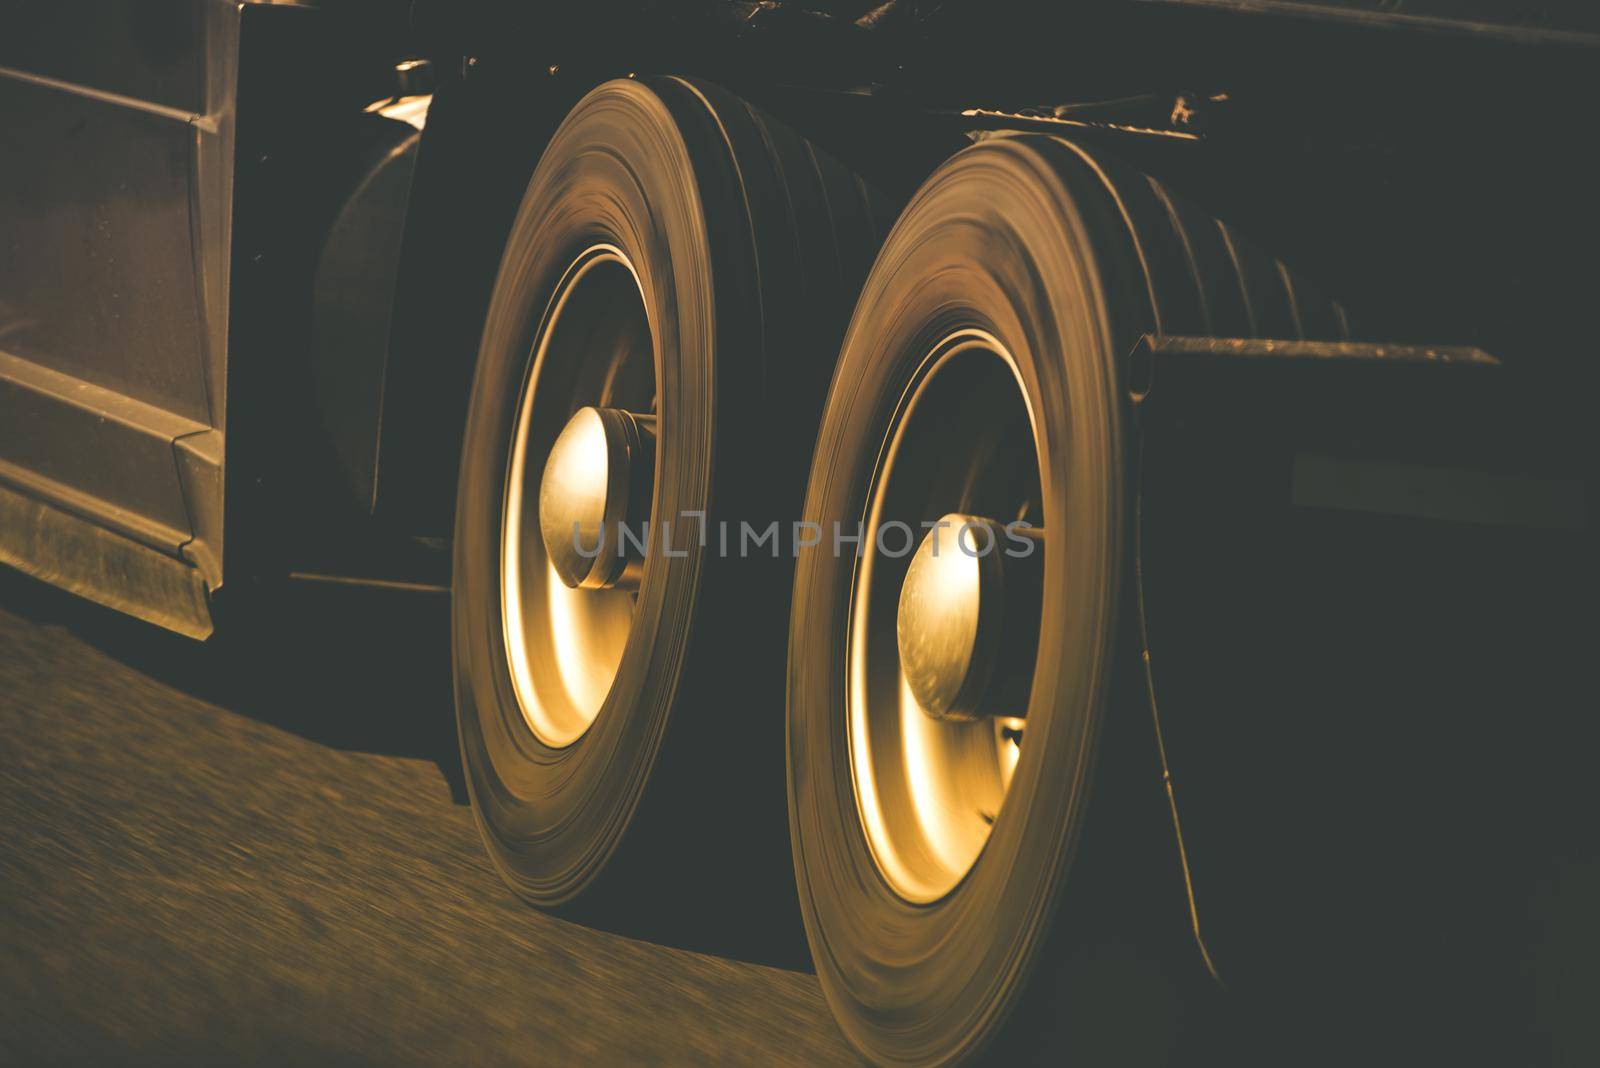 Spinning Semi Truck Wheels Closeup Photo. Browny Color Grading. Trucking and Transportation Theme. by welcomia